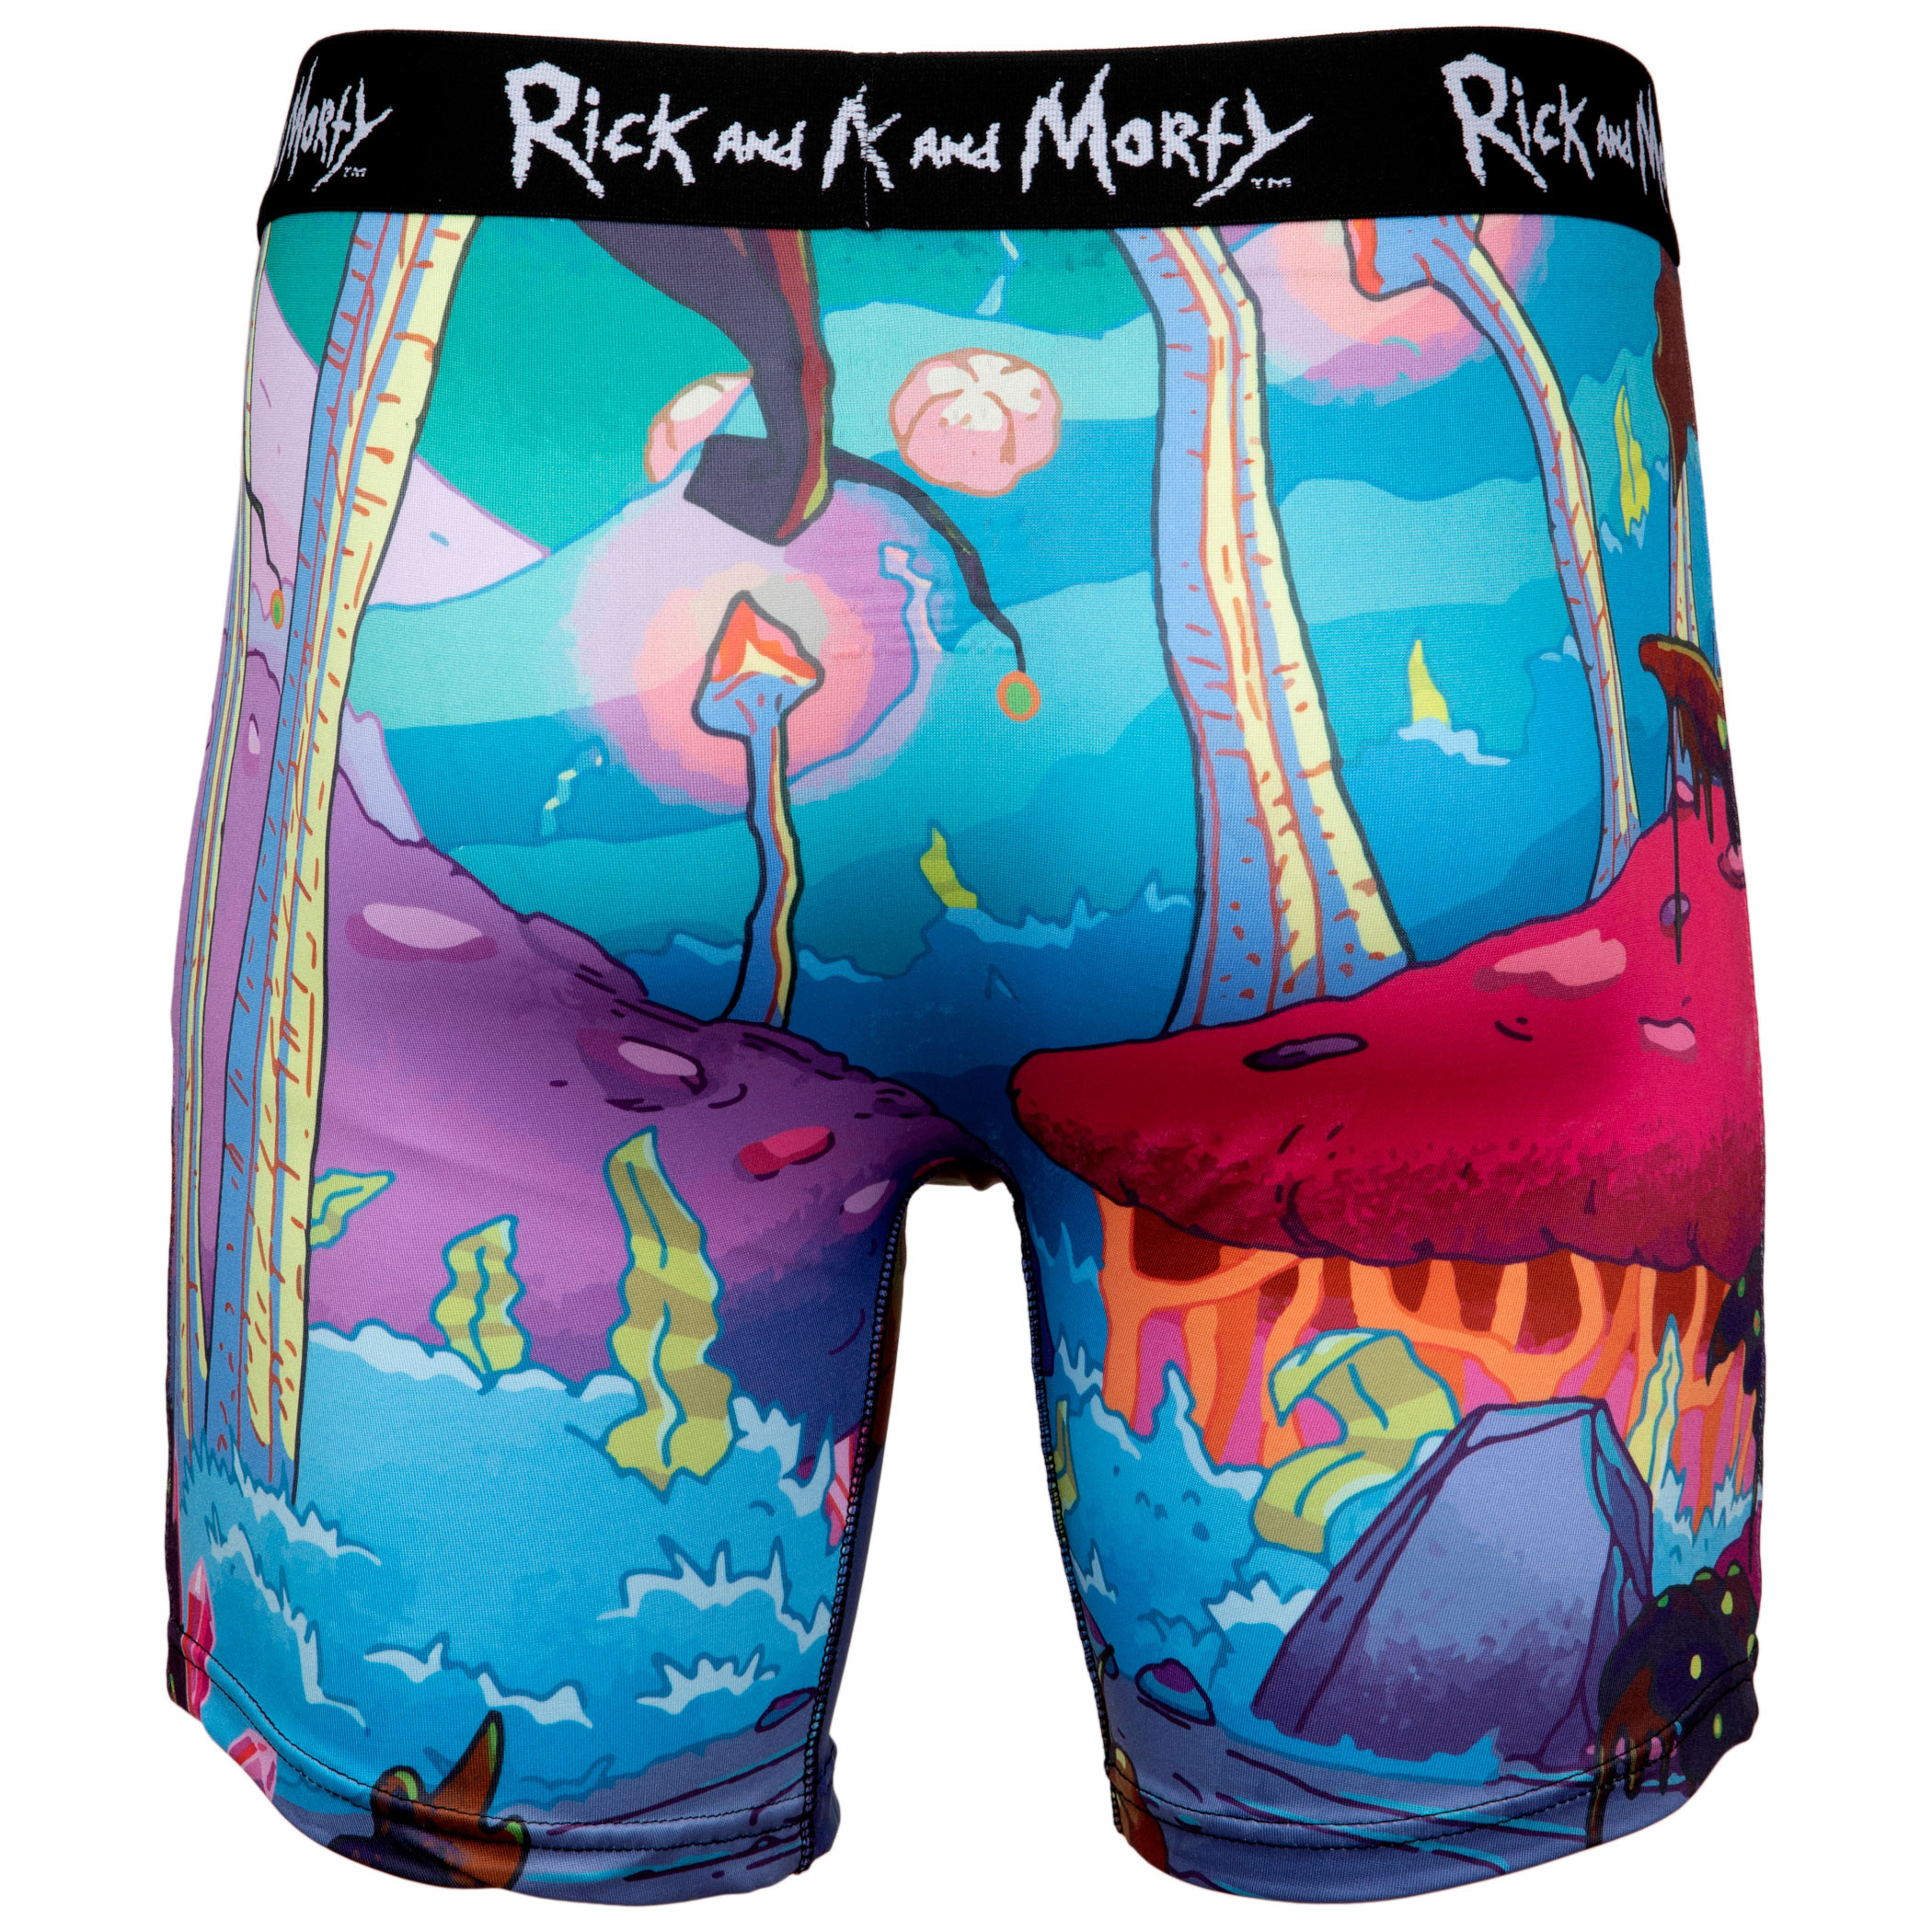 Rick and Morty Pickle Rick All Over Print Boxer Briefs-XLarge (40